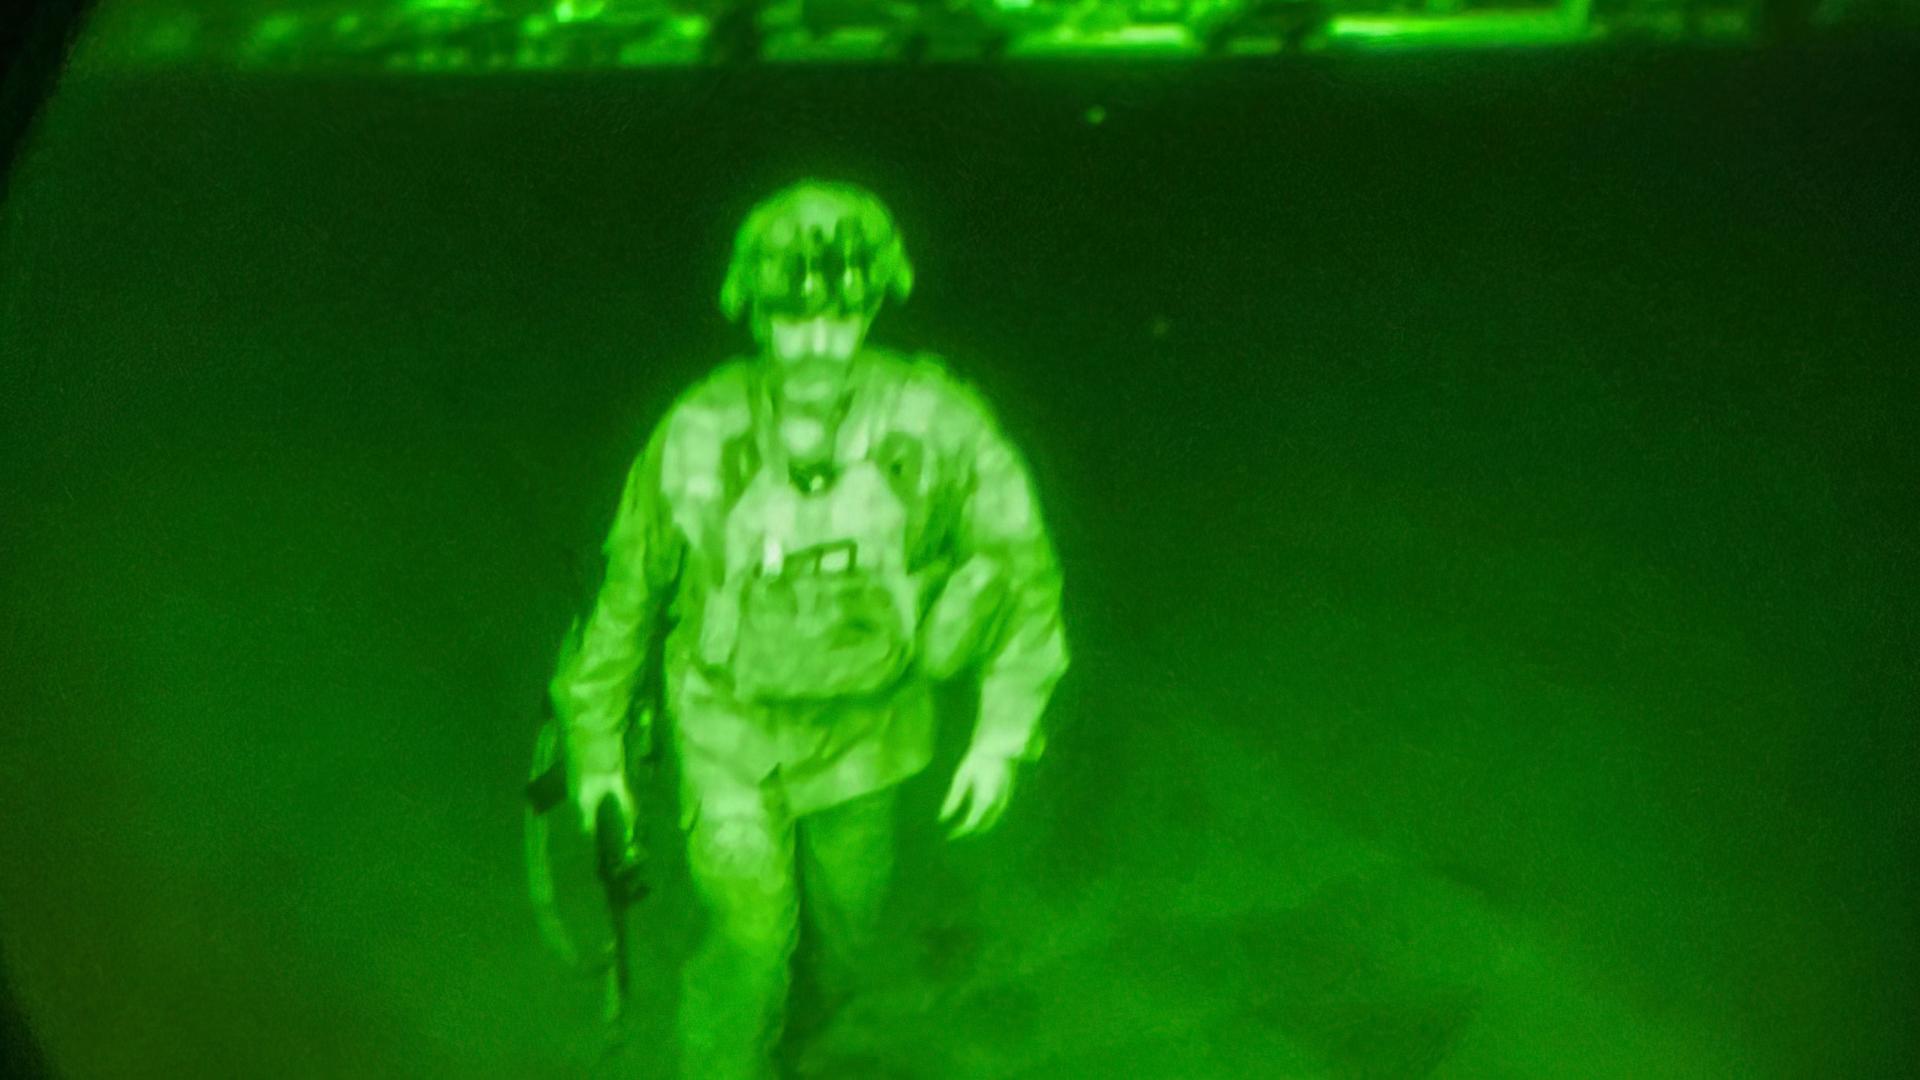 A US military officer is shown wearing full combat gear under the green light of a night goggle lens.